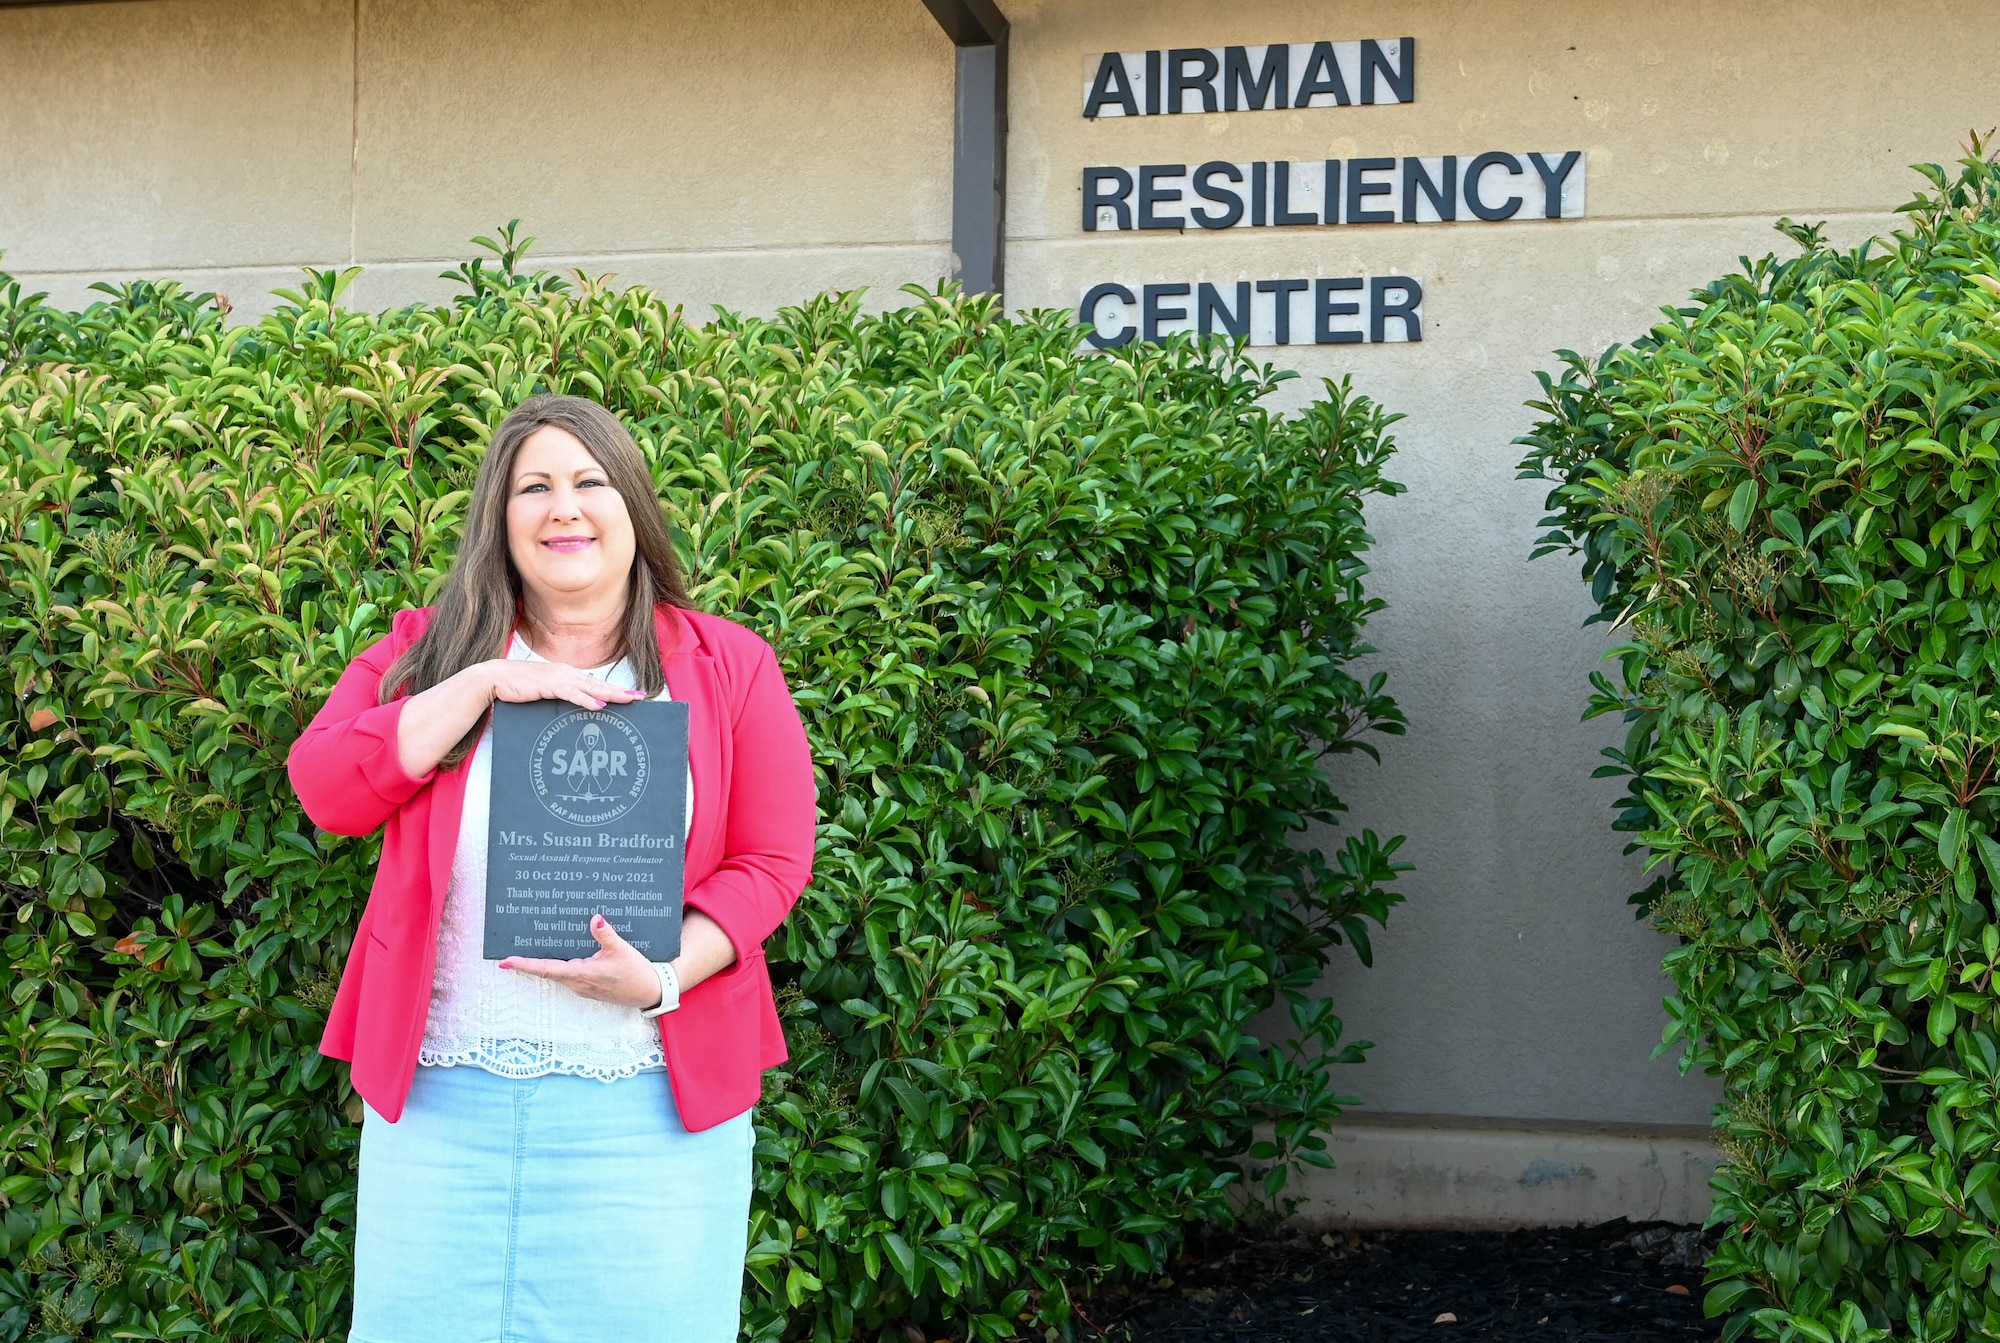 Susan Bradford, 97th Air Mobility Wing violence prevention integrator (VPI), poses for a photo at Altus Air Force Base (AAFB), Oklahoma, June 9, 2022. Bradford was a Sexual Assault Prevention and Response advocate before becoming the VPI at AAFB. (U.S. Air Force photo by Senior Airman Kayla Christenson)